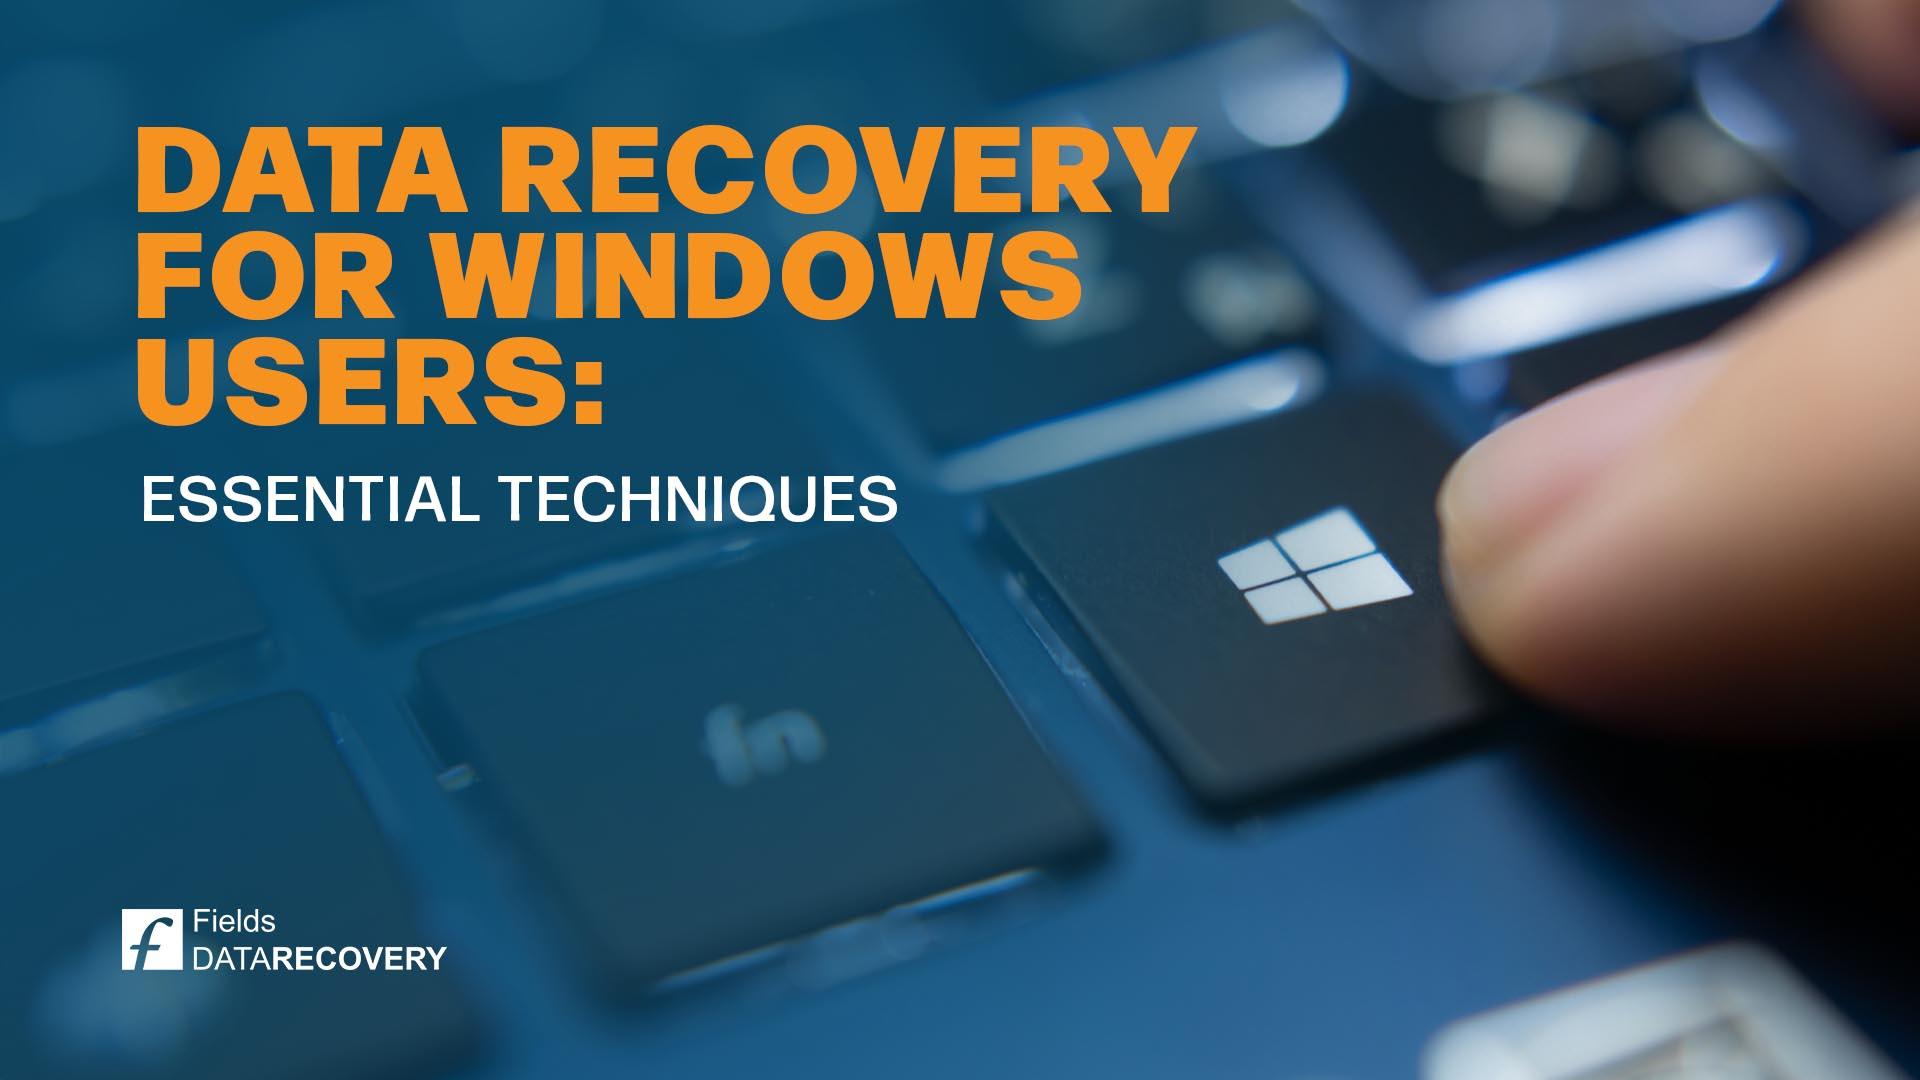 Data Recovery for Windows Users: Essential Techniques